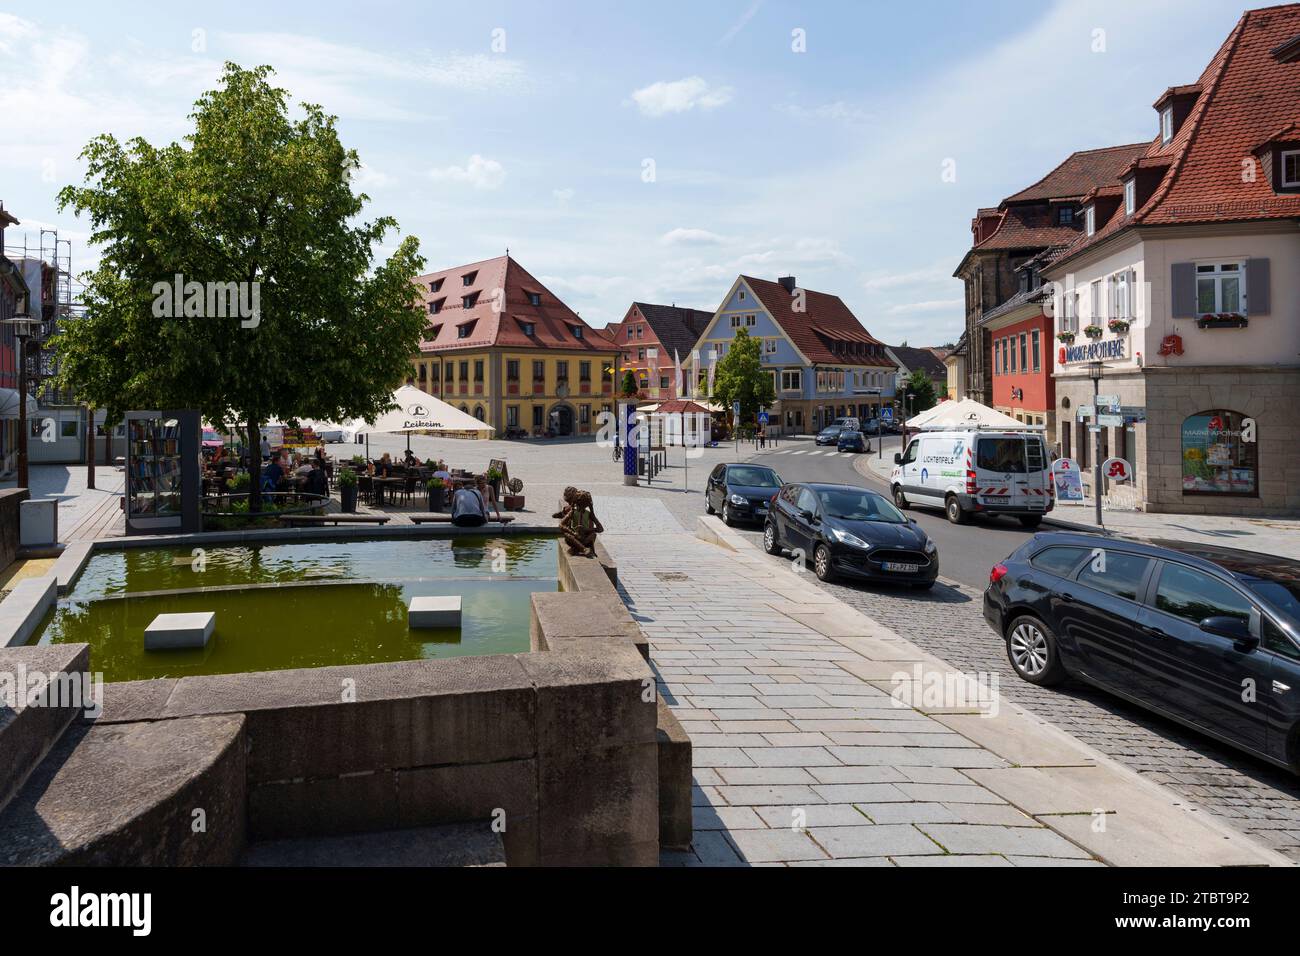 Basket-making town of Lichtenfels with its historic old town, district of Lichtenfels, Upper Franconia, Franconia, Bavaria, Germany Stock Photo